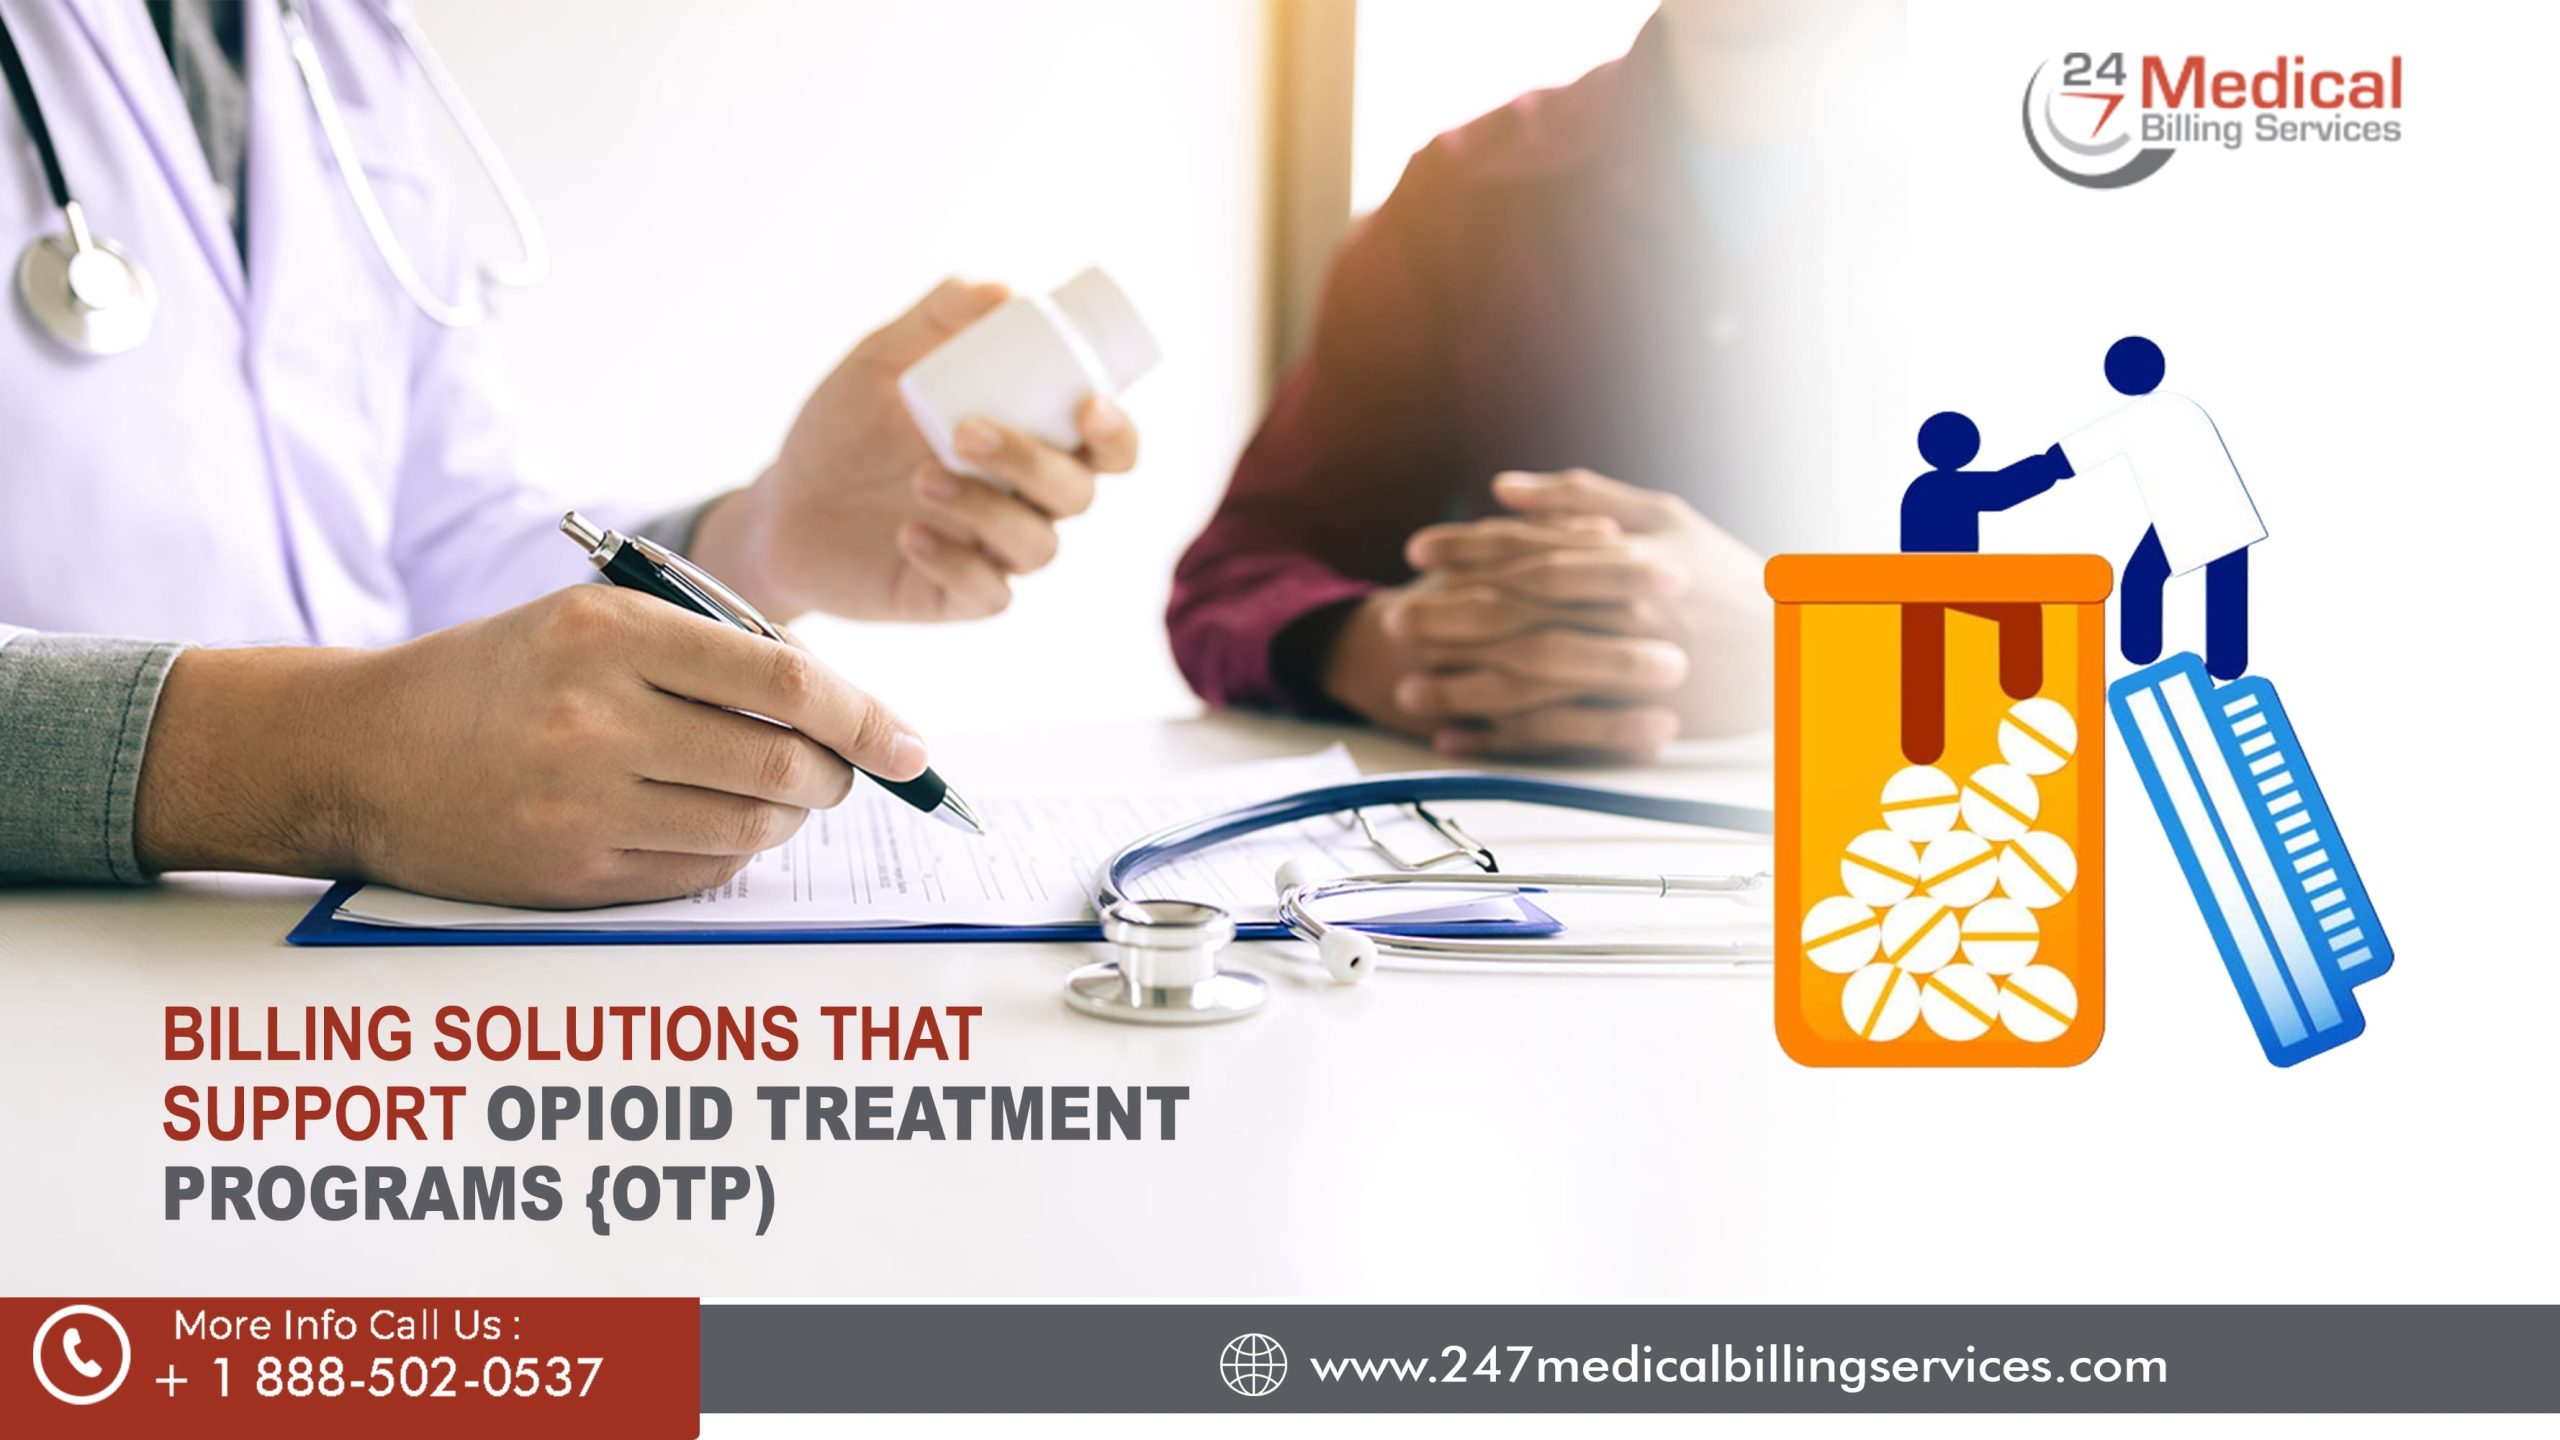  Billing Solutions that Support Opioid Treatment Programs (OTP)